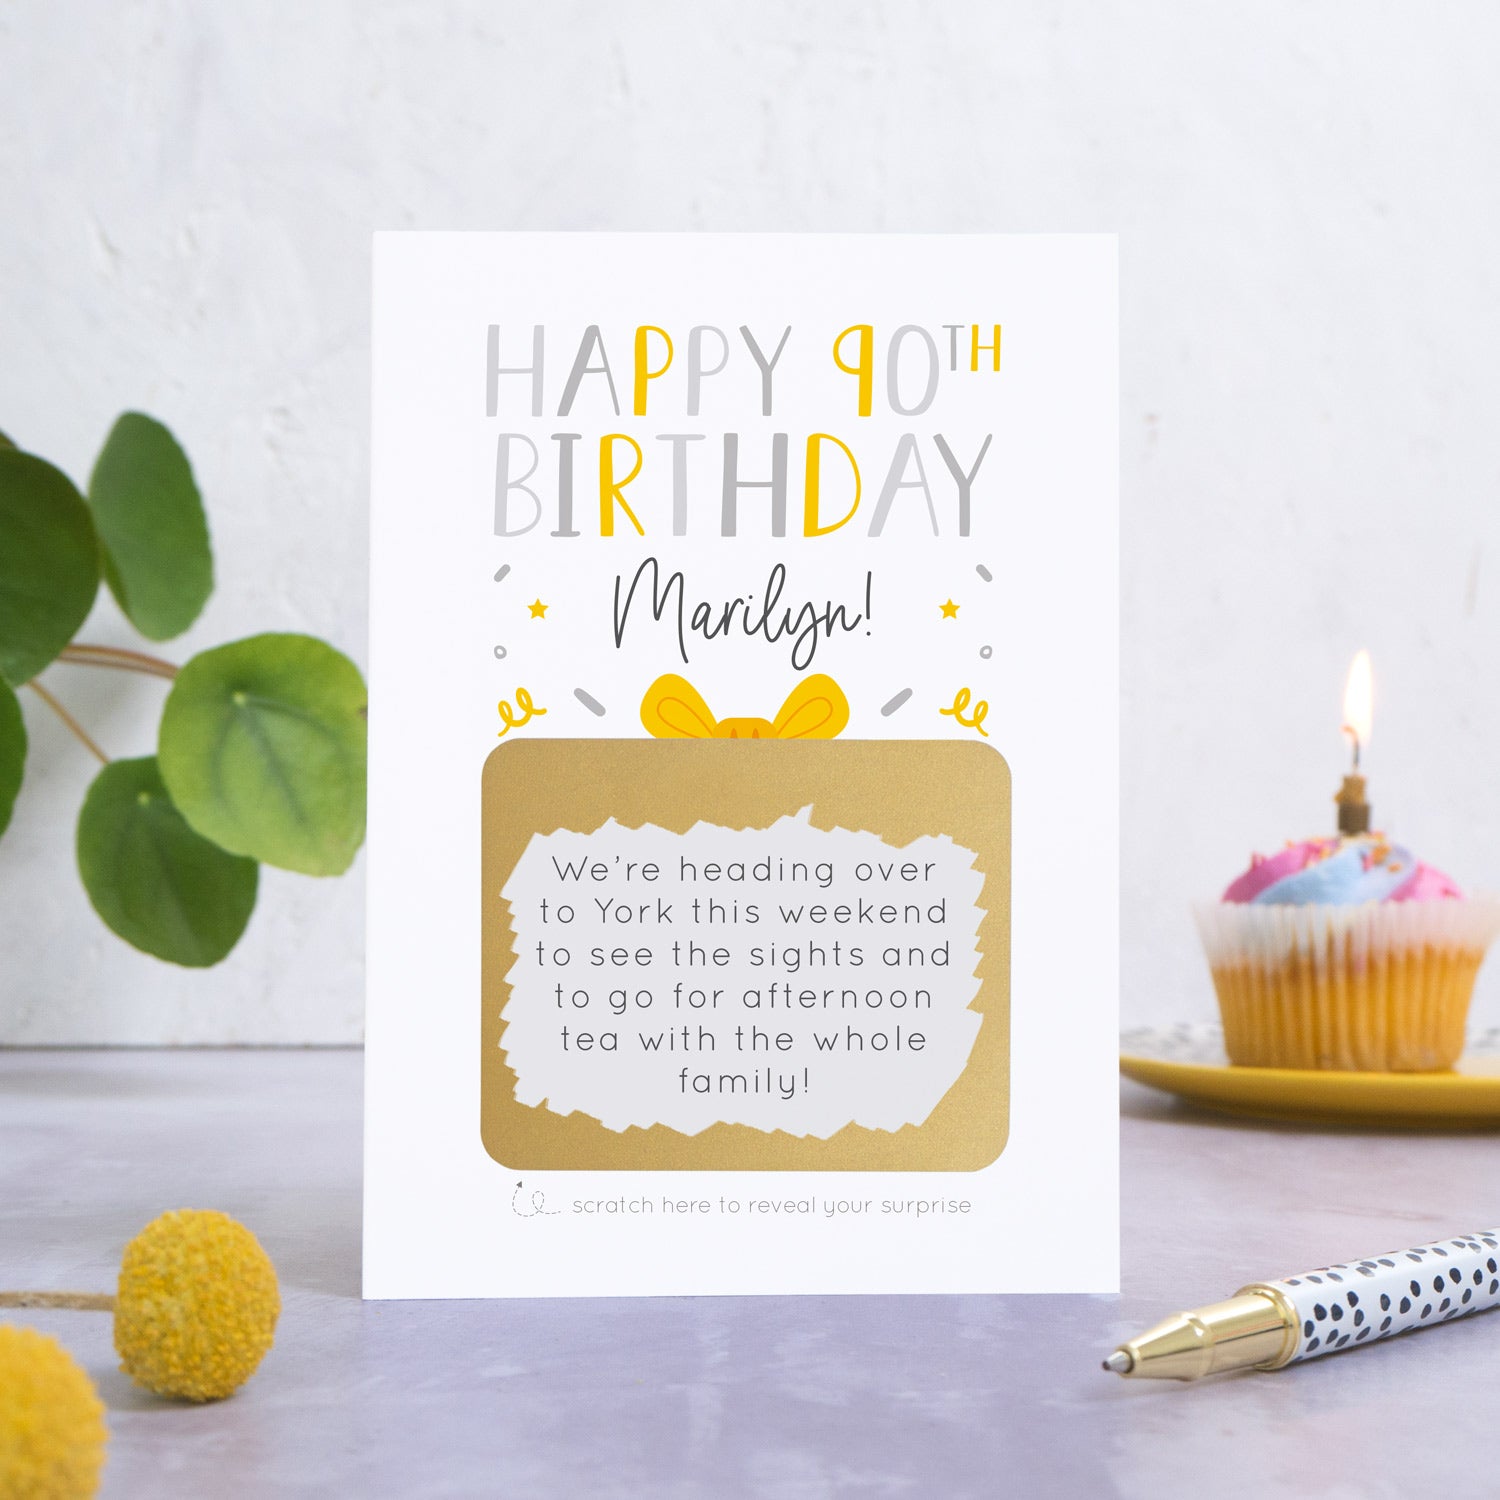 A personalised happy 90th birthday scratch card in grey that has been photographed on a white and grey background. There is foliage and yellow flowers on the left and a cupcake and a pen to the right. The card features the recipients name and a scratch panel that has been scratched off revealing a personalised message.